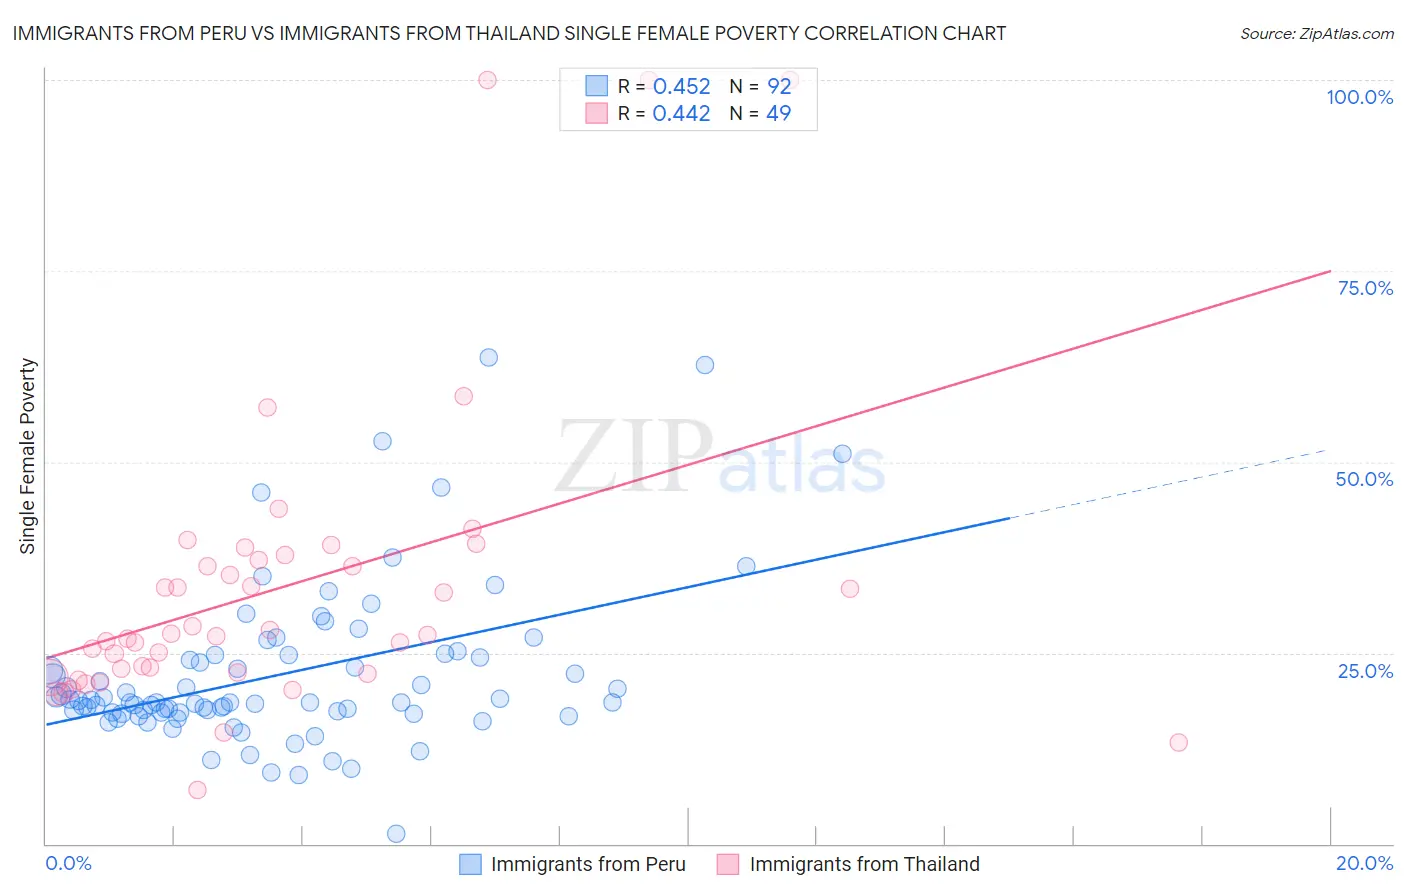 Immigrants from Peru vs Immigrants from Thailand Single Female Poverty